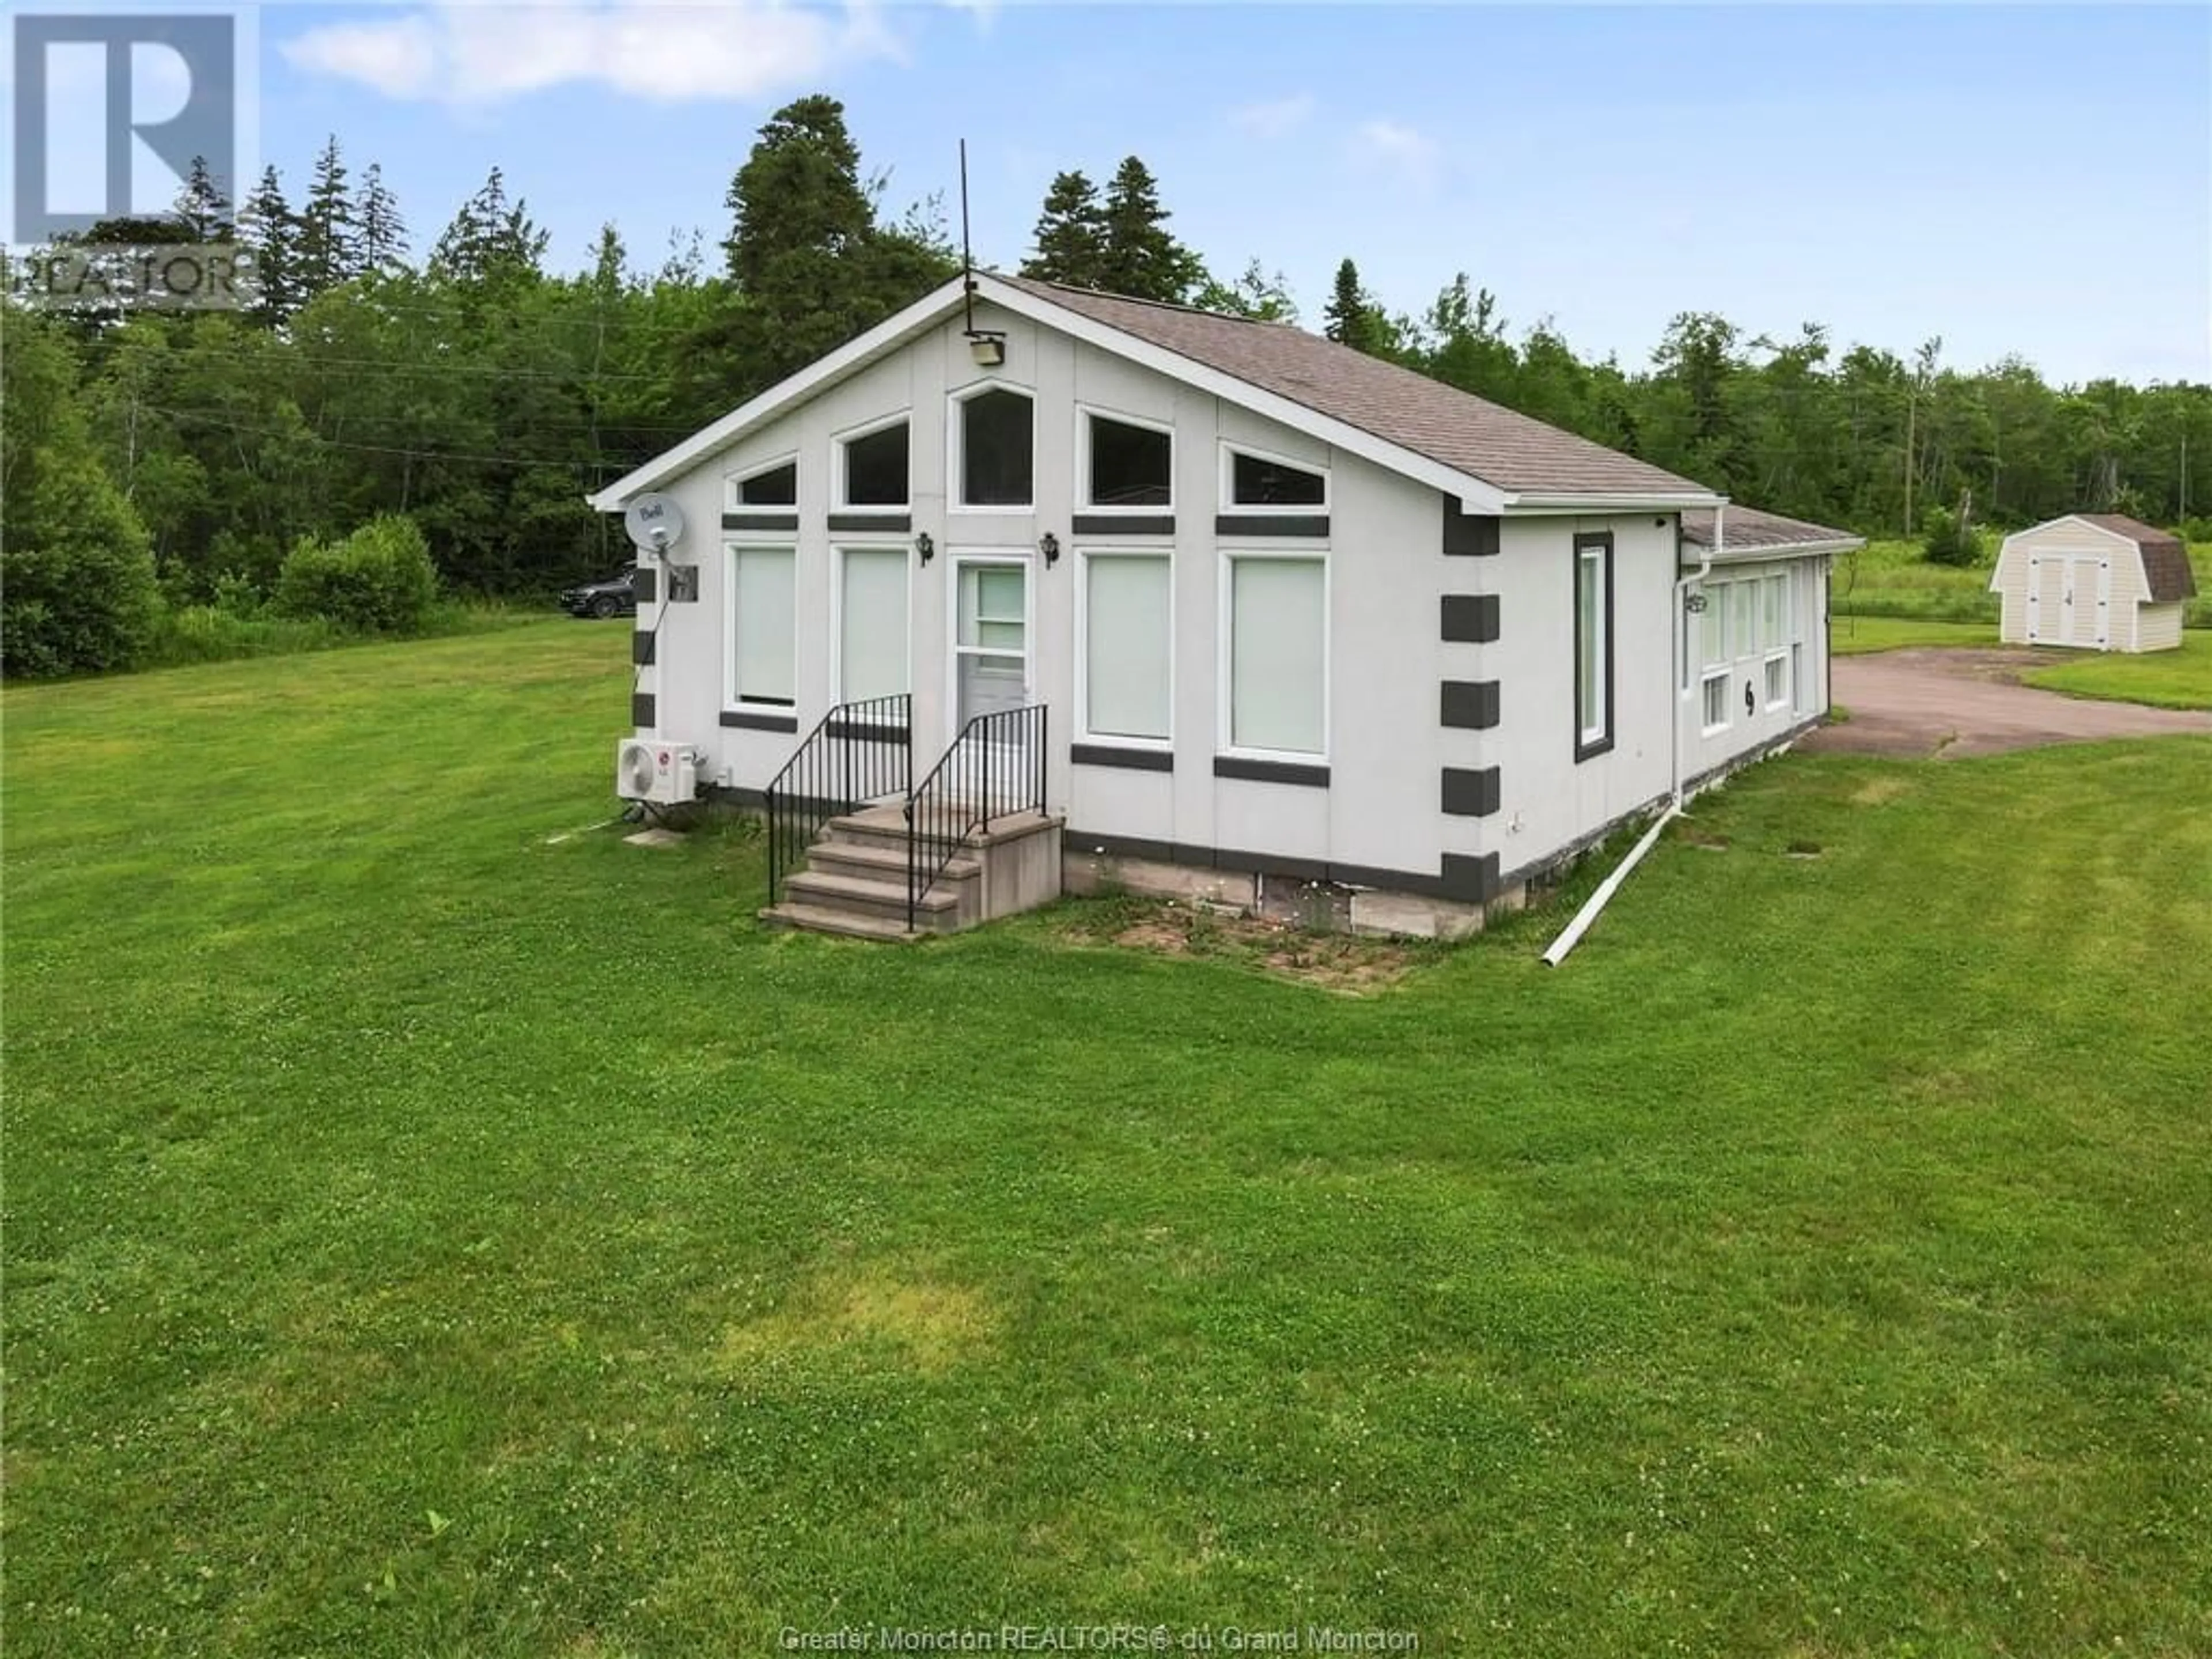 Cottage for 87 Caissie, Grande-Digue New Brunswick E4R3Y3